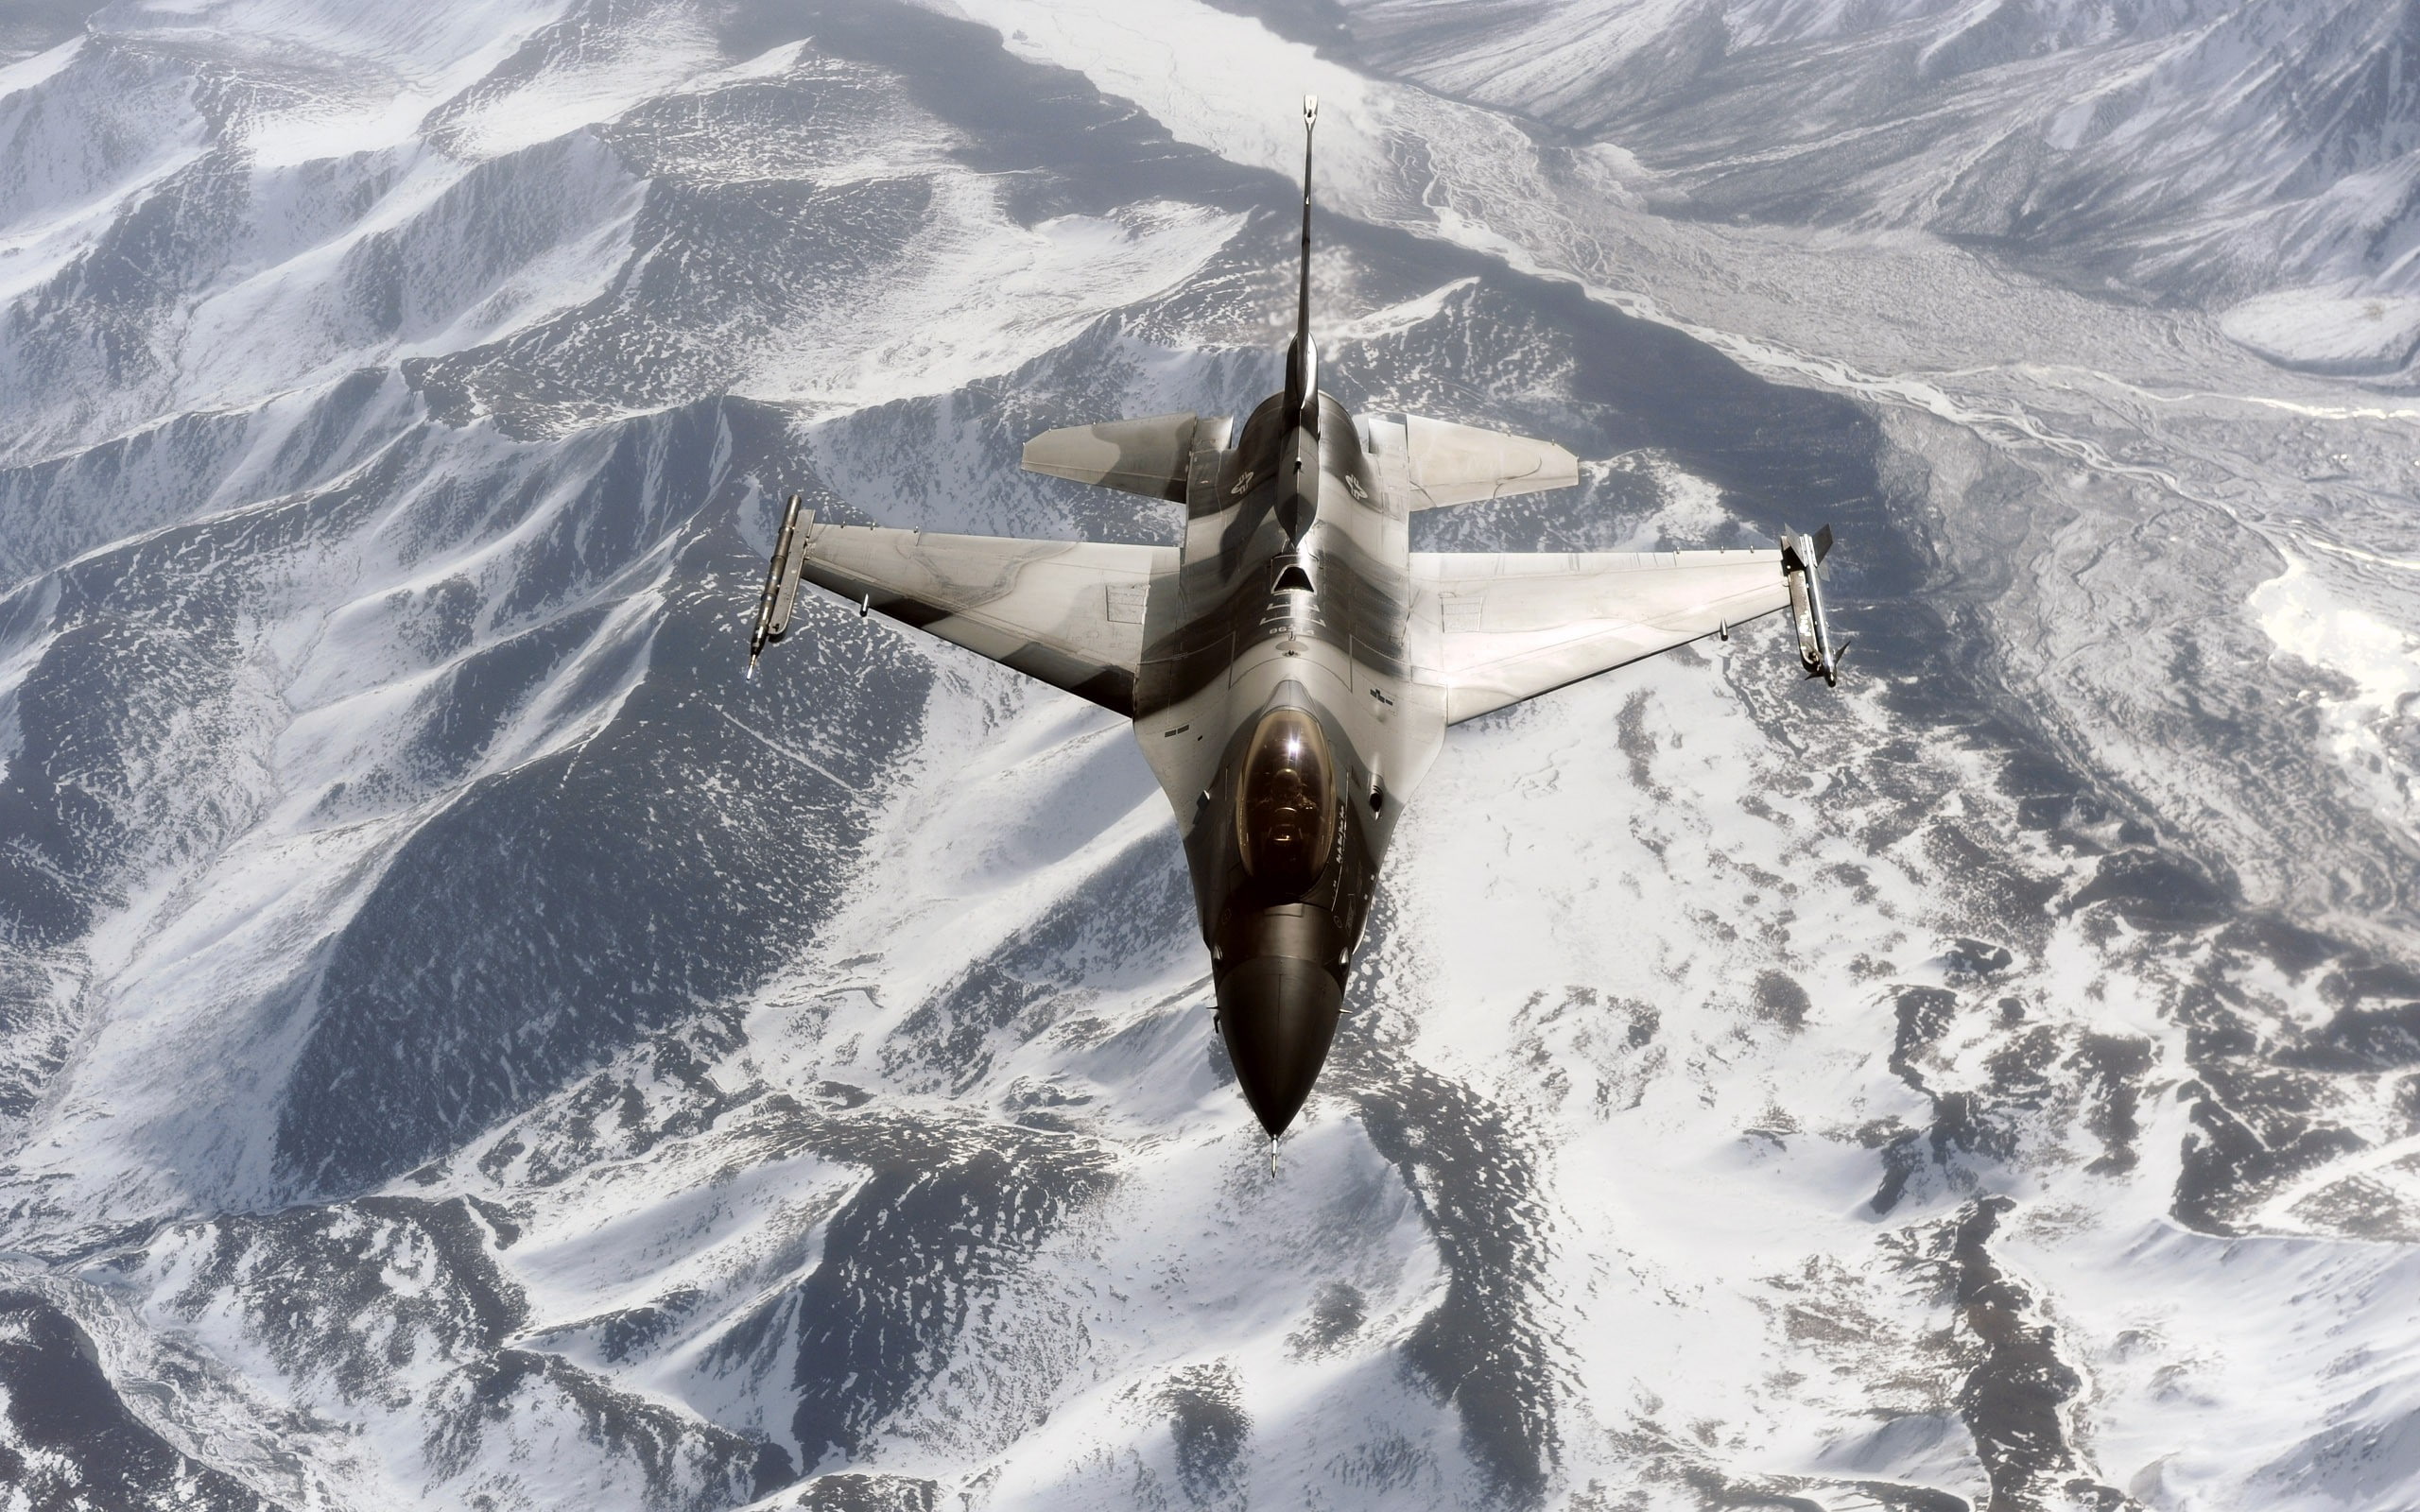 jet fighter, military aircraft, airplane, mountains, General Dynamics F-16 Fighting Falcon